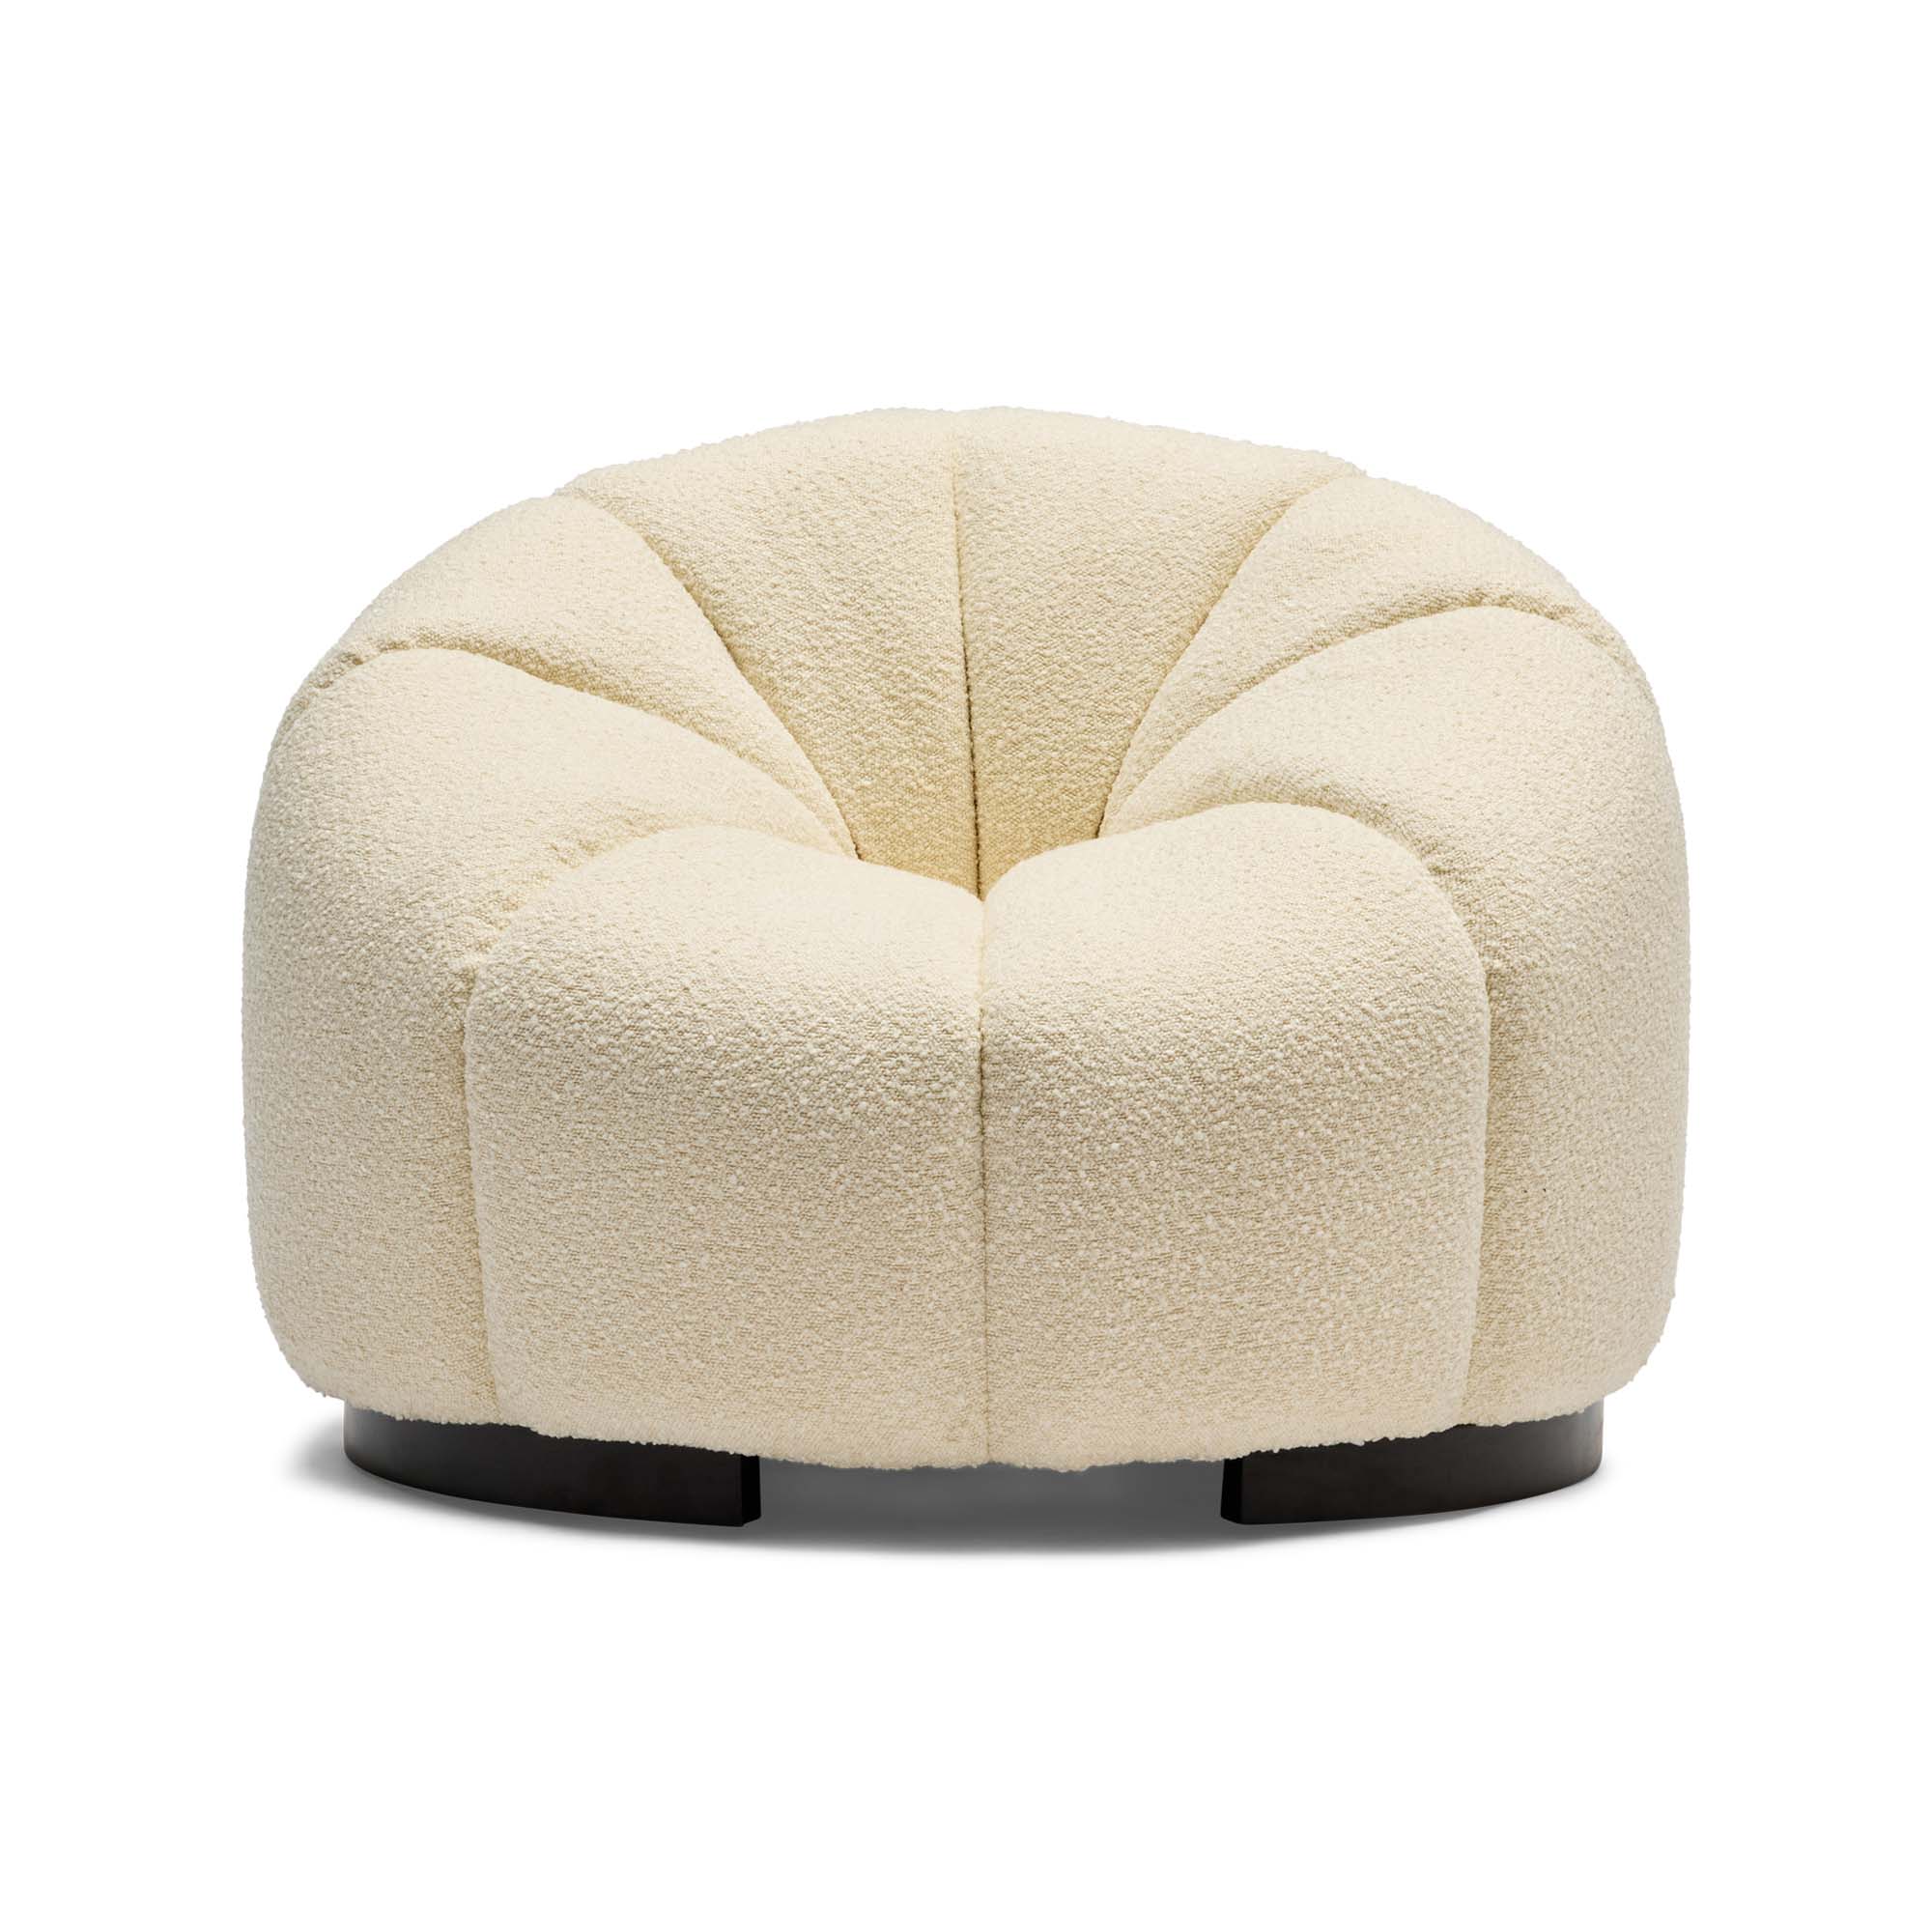 Modena Occasional Chair Ivory Sample